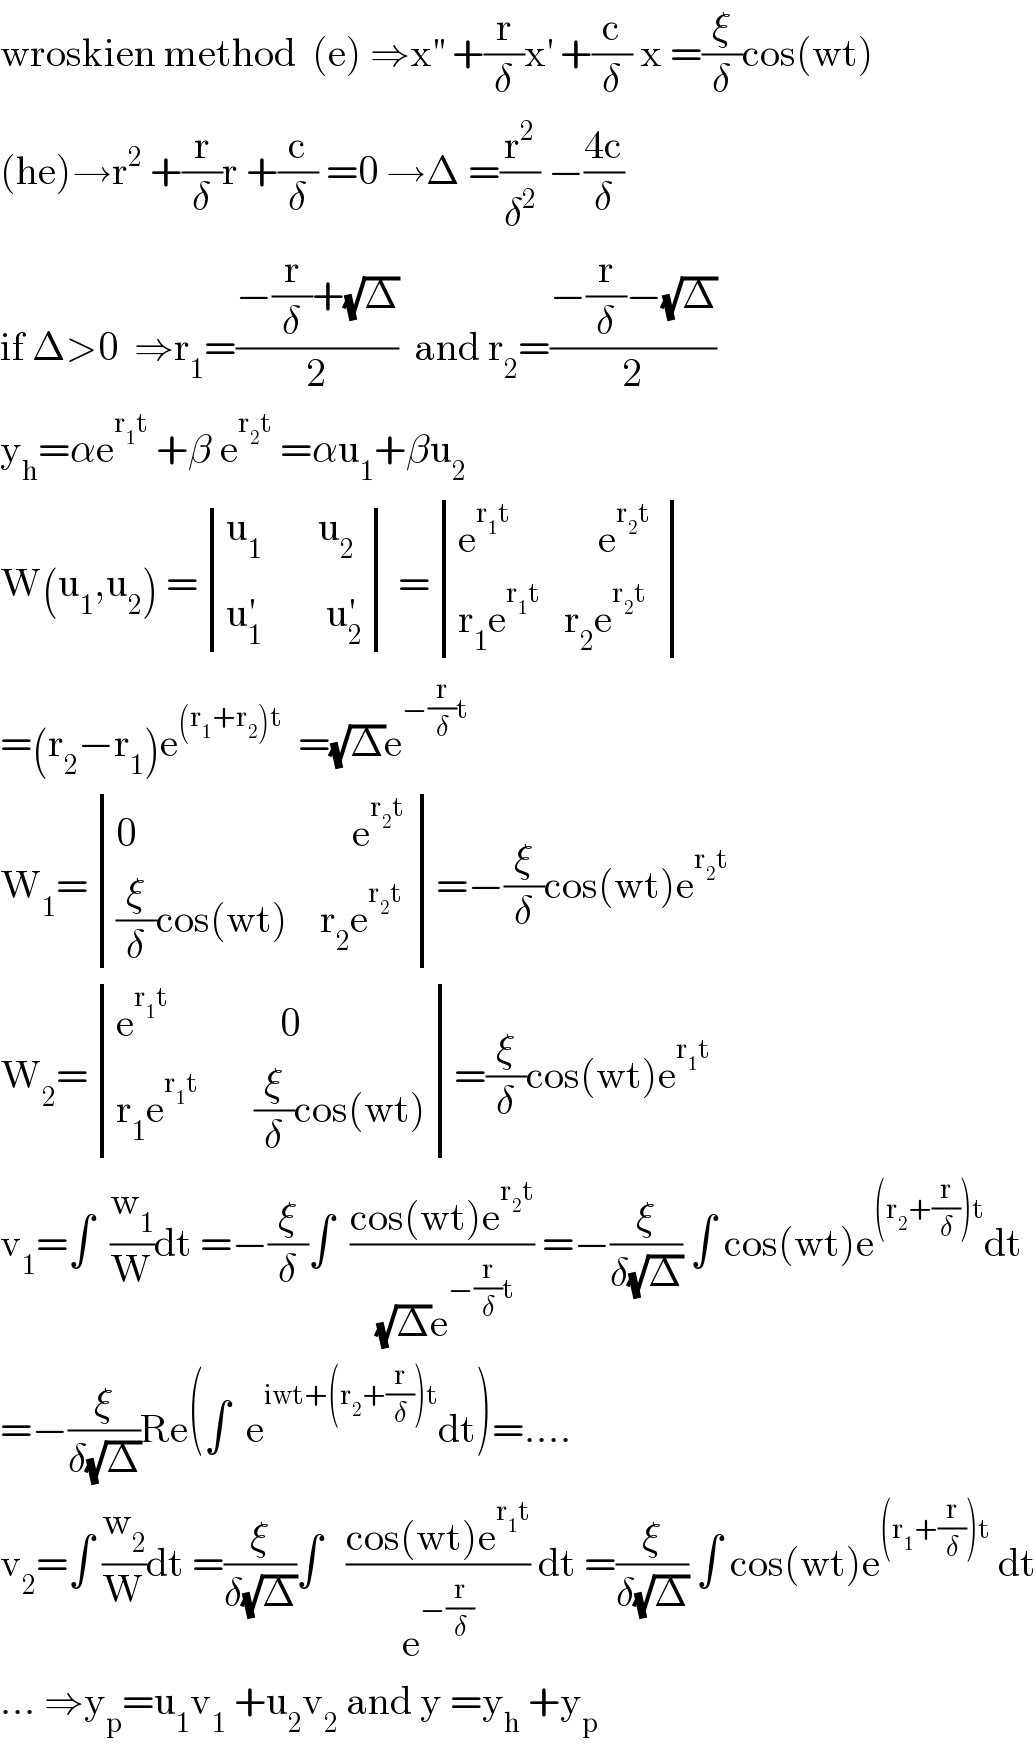 wroskien method  (e) ⇒x^(′′)  +(r/δ)x^′  +(c/δ) x =(ξ/δ)cos(wt)  (he)→r^2  +(r/δ)r +(c/δ) =0 →Δ =(r^2 /δ^2 ) −((4c)/δ)   if Δ>0  ⇒r_1 =((−(r/δ)+(√Δ))/2)  and r_2 =((−(r/δ)−(√Δ))/2)  y_h =αe^(r_1 t)  +β e^(r_2 t)  =αu_1 +βu_2   W(u_1 ,u_2 ) = determinant (((u_1        u_2 )),((u_1 ^′         u_2 ^′ ))) = determinant (((e^(r_1 t)            e^(r_2 t)  )),((r_1 e^(r_1 t)    r_2 e^(r_2 t) )))  =(r_2 −r_1 )e^((r_1 +r_2 )t)   =(√Δ)e^(−(r/δ)t)   W_1 = determinant (((0                           e^(r_2 t ) )),(((ξ/δ)cos(wt)    r_2 e^(r_2 t) )))=−(ξ/δ)cos(wt)e^(r_2 t)   W_2 = determinant (((e^(r_1 t)               0)),((r_1 e^(r_1 t)        (ξ/δ)cos(wt))))=(ξ/δ)cos(wt)e^(r_1 t)   v_1 =∫  (w_1 /W)dt =−(ξ/δ)∫  ((cos(wt)e^(r_2 t) )/((√Δ)e^(−(r/δ)t) )) =−(ξ/(δ(√Δ))) ∫ cos(wt)e^((r_2 +(r/δ))t) dt  =−(ξ/(δ(√Δ)))Re(∫  e^(iwt+(r_2 +(r/δ))t) dt)=....  v_2 =∫ (w_2 /W)dt =(ξ/(δ(√Δ)))∫   ((cos(wt)e^(r_1 t) )/e^(−(r/δ)) ) dt =(ξ/(δ(√Δ))) ∫ cos(wt)e^((r_1 +(r/δ))t)  dt  ... ⇒y_p =u_1 v_1  +u_2 v_2  and y =y_h  +y_p   